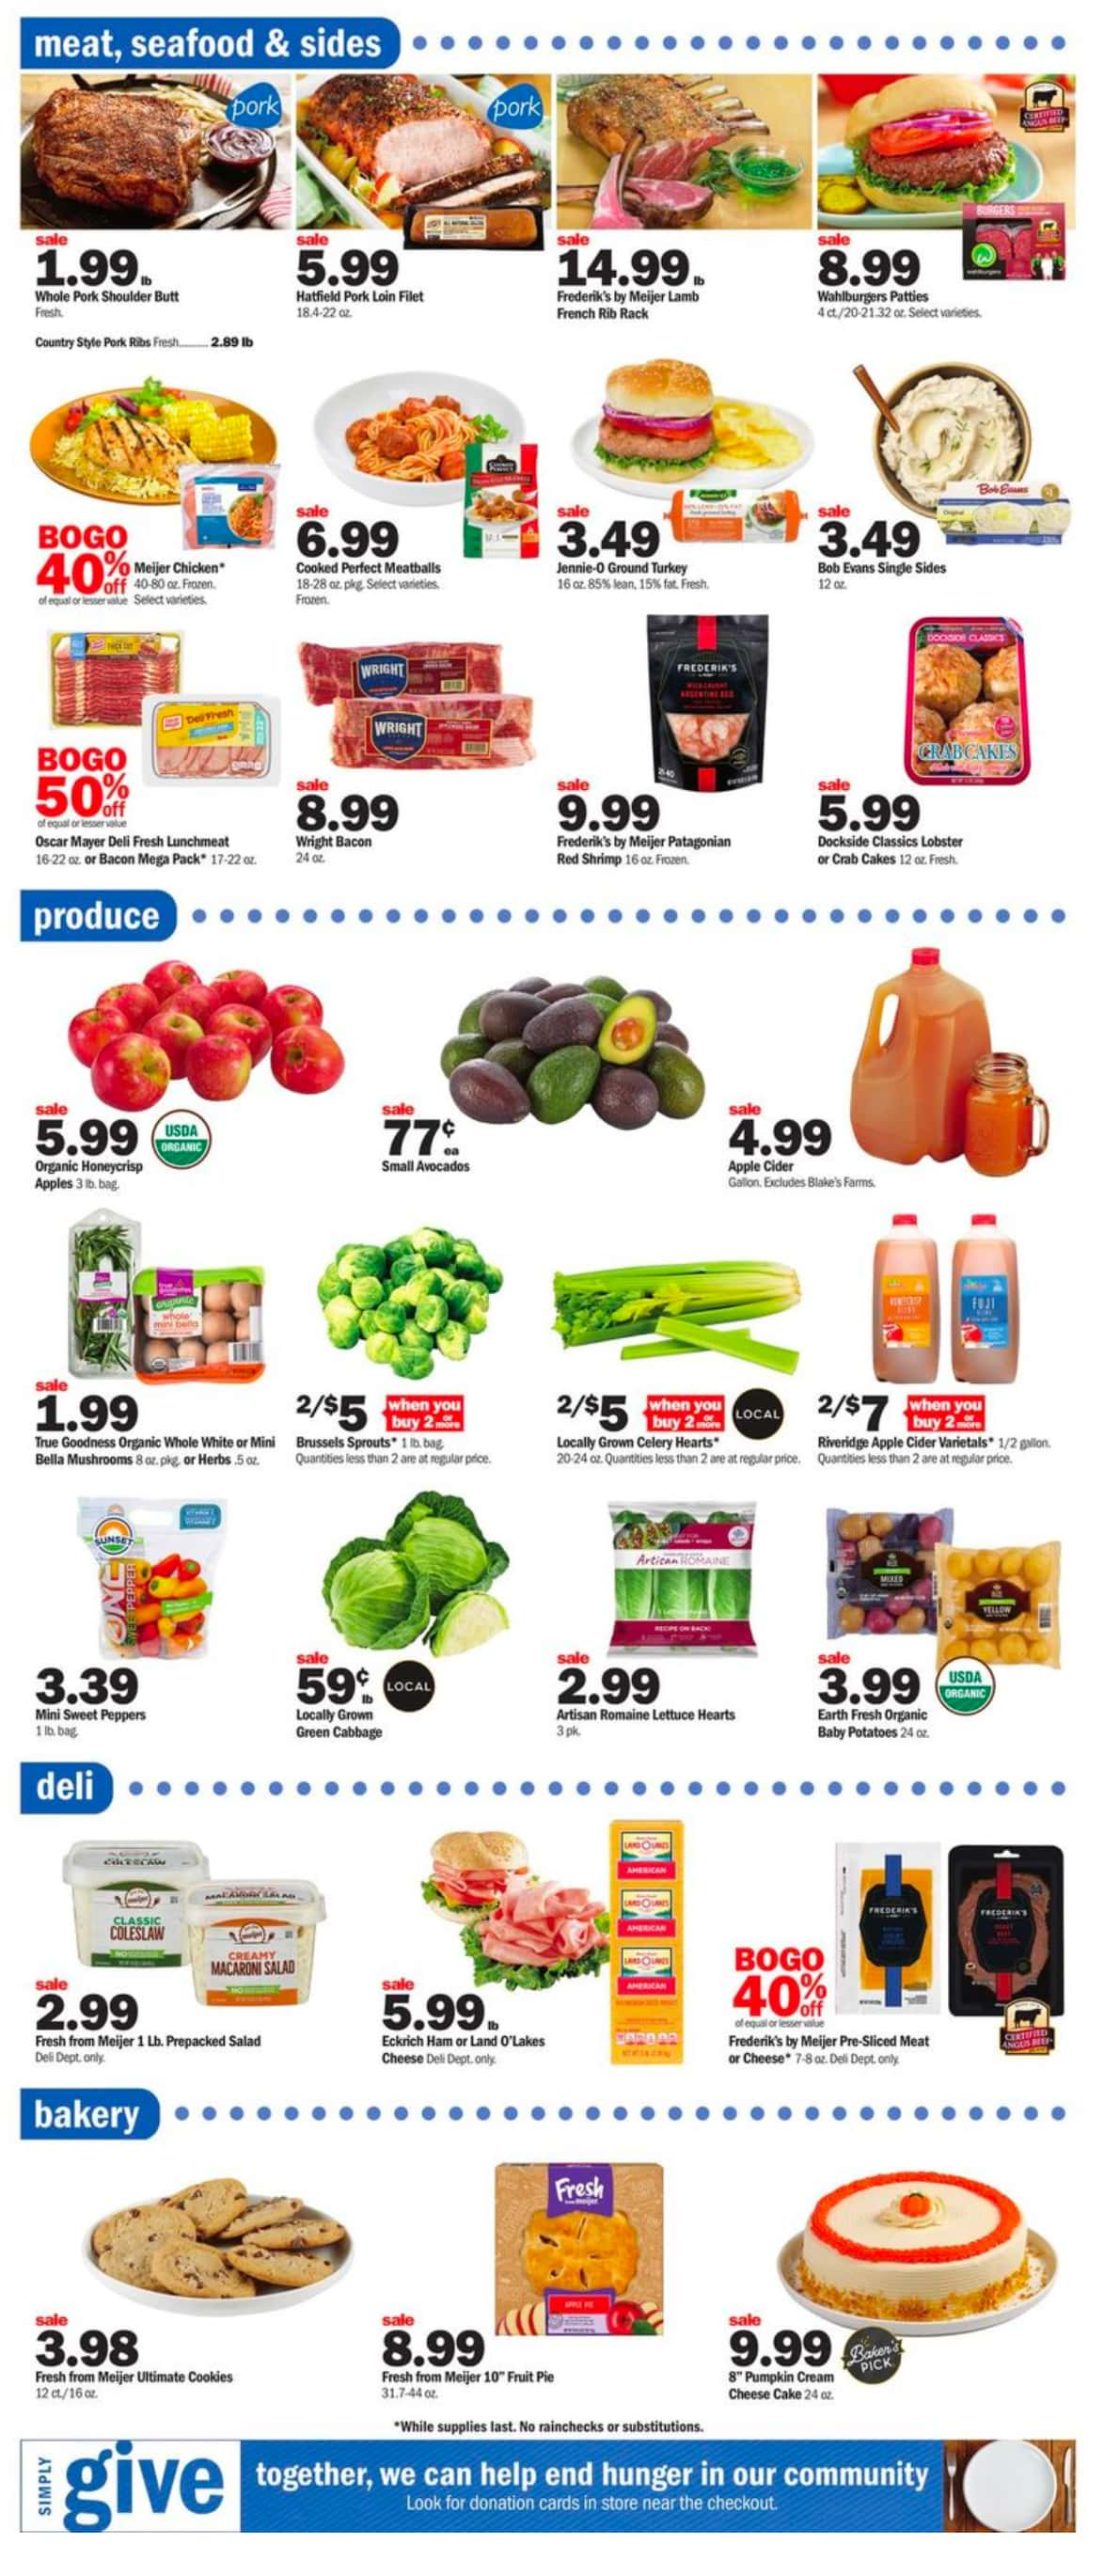 Meijer Weekly Ad May 1 to May 7, 2022 3 – meijer ad 4 scaled